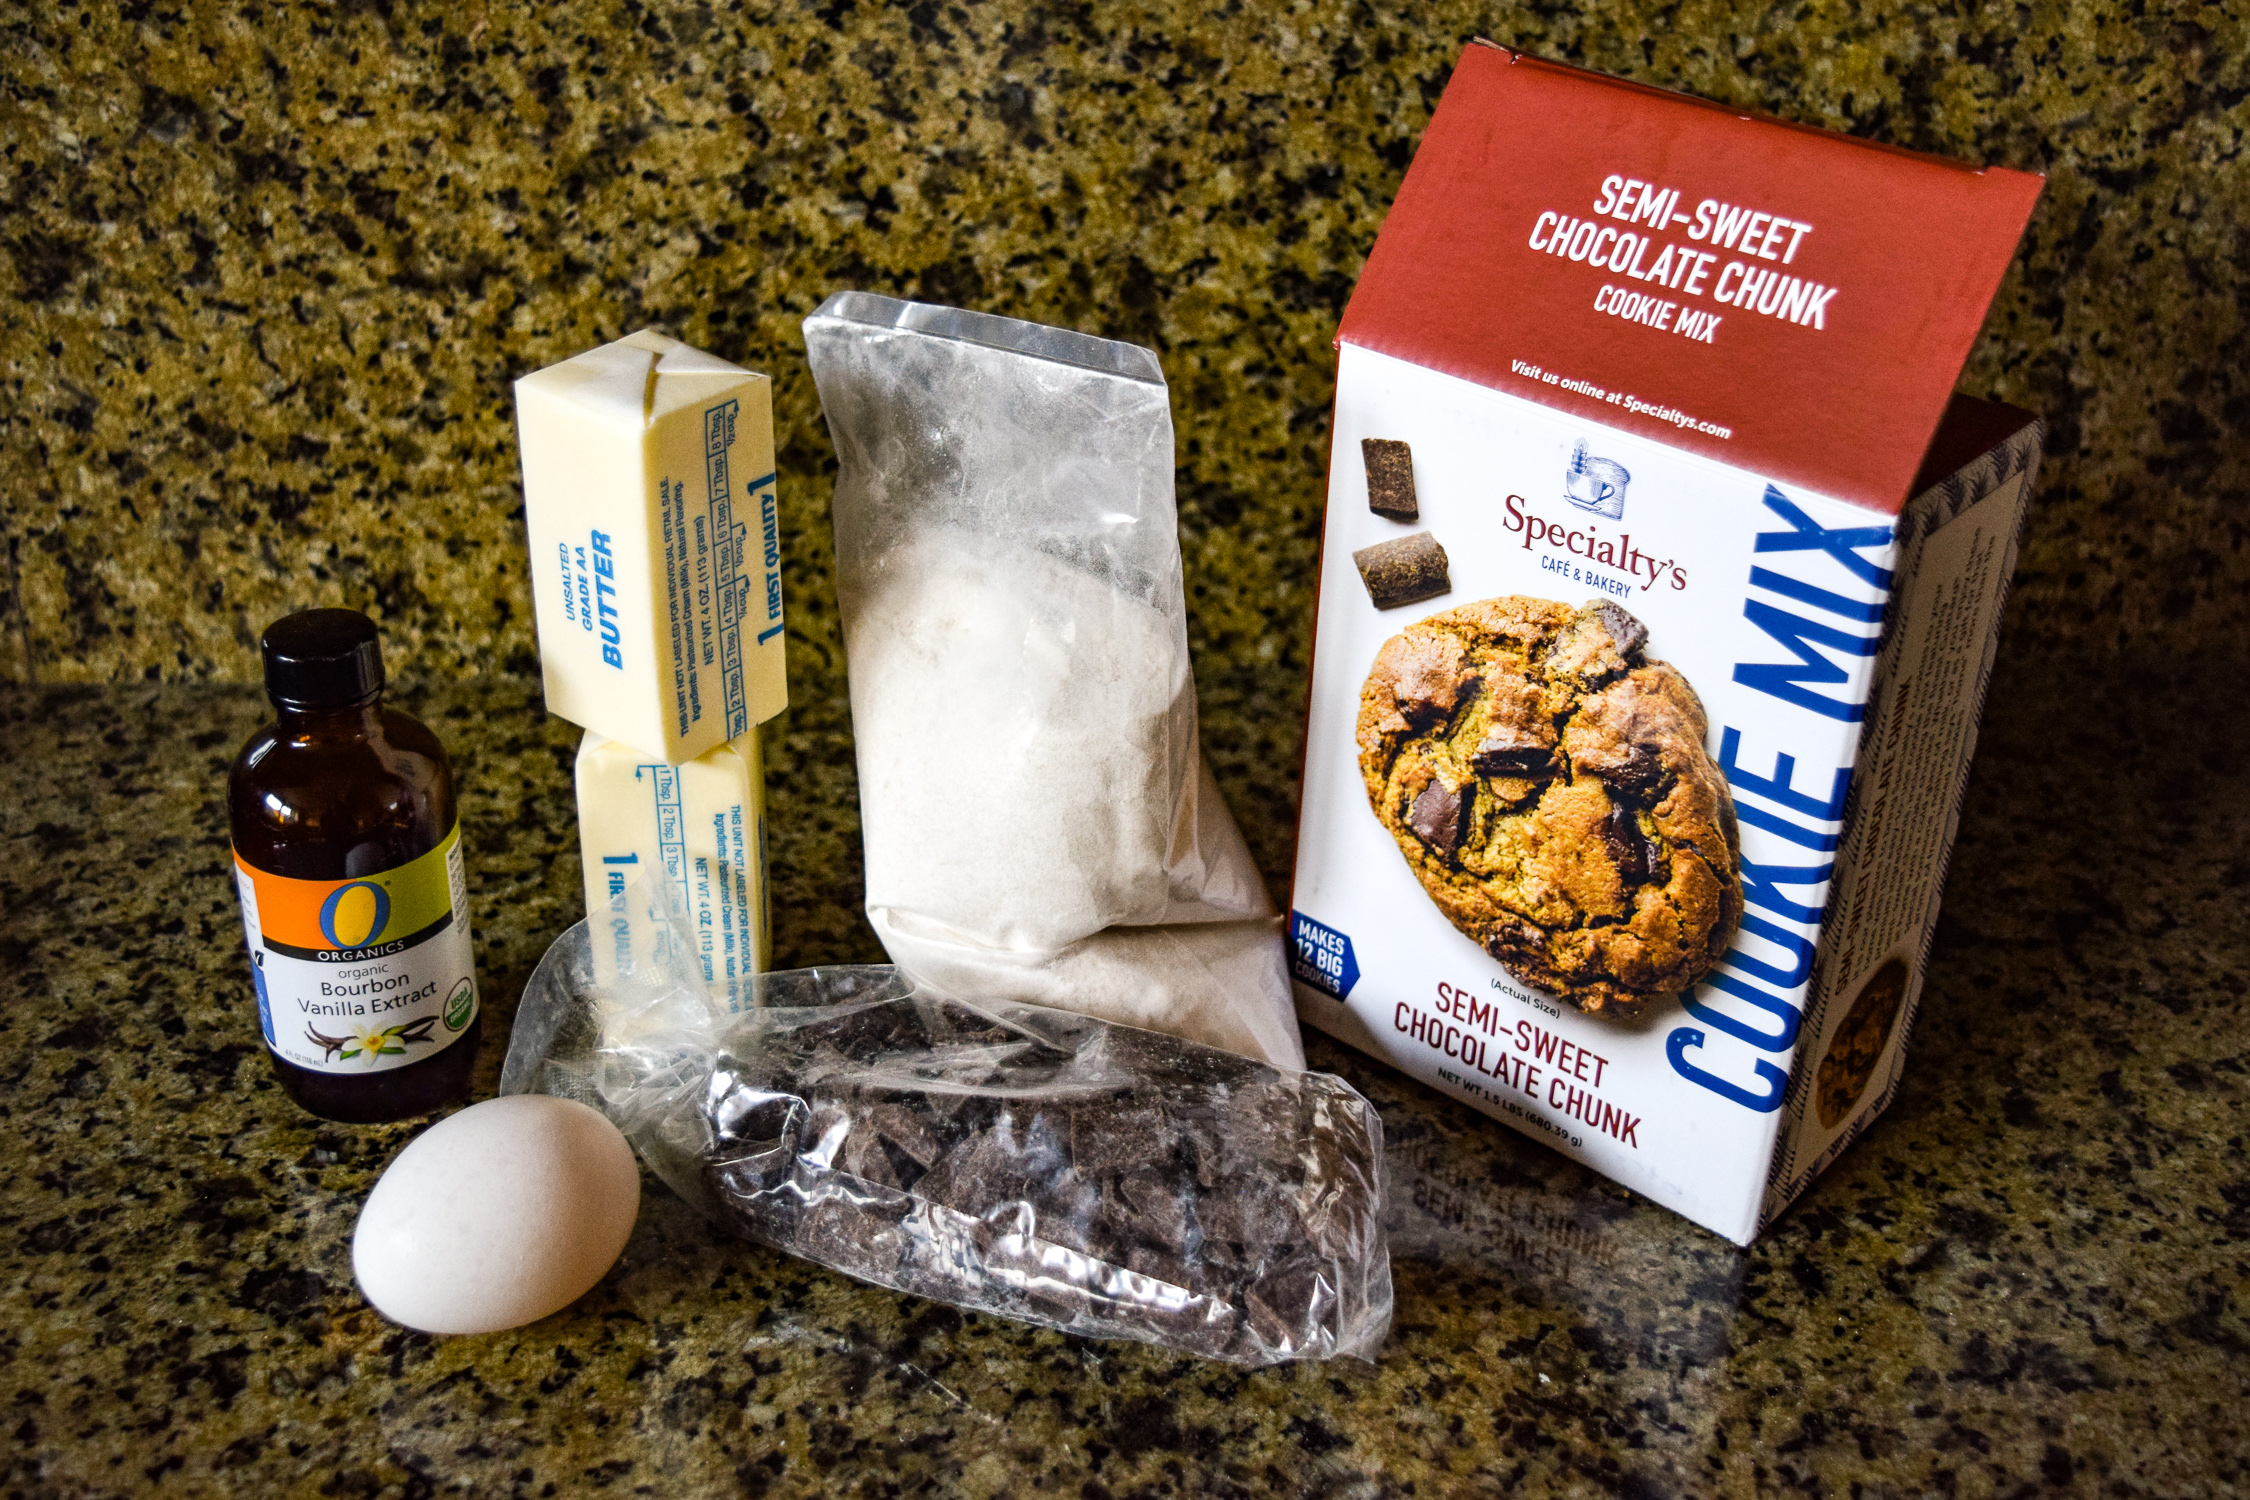 Specialty's Semi-Sweet Chocolate Chunk Cookie ingredients with mix unboxed